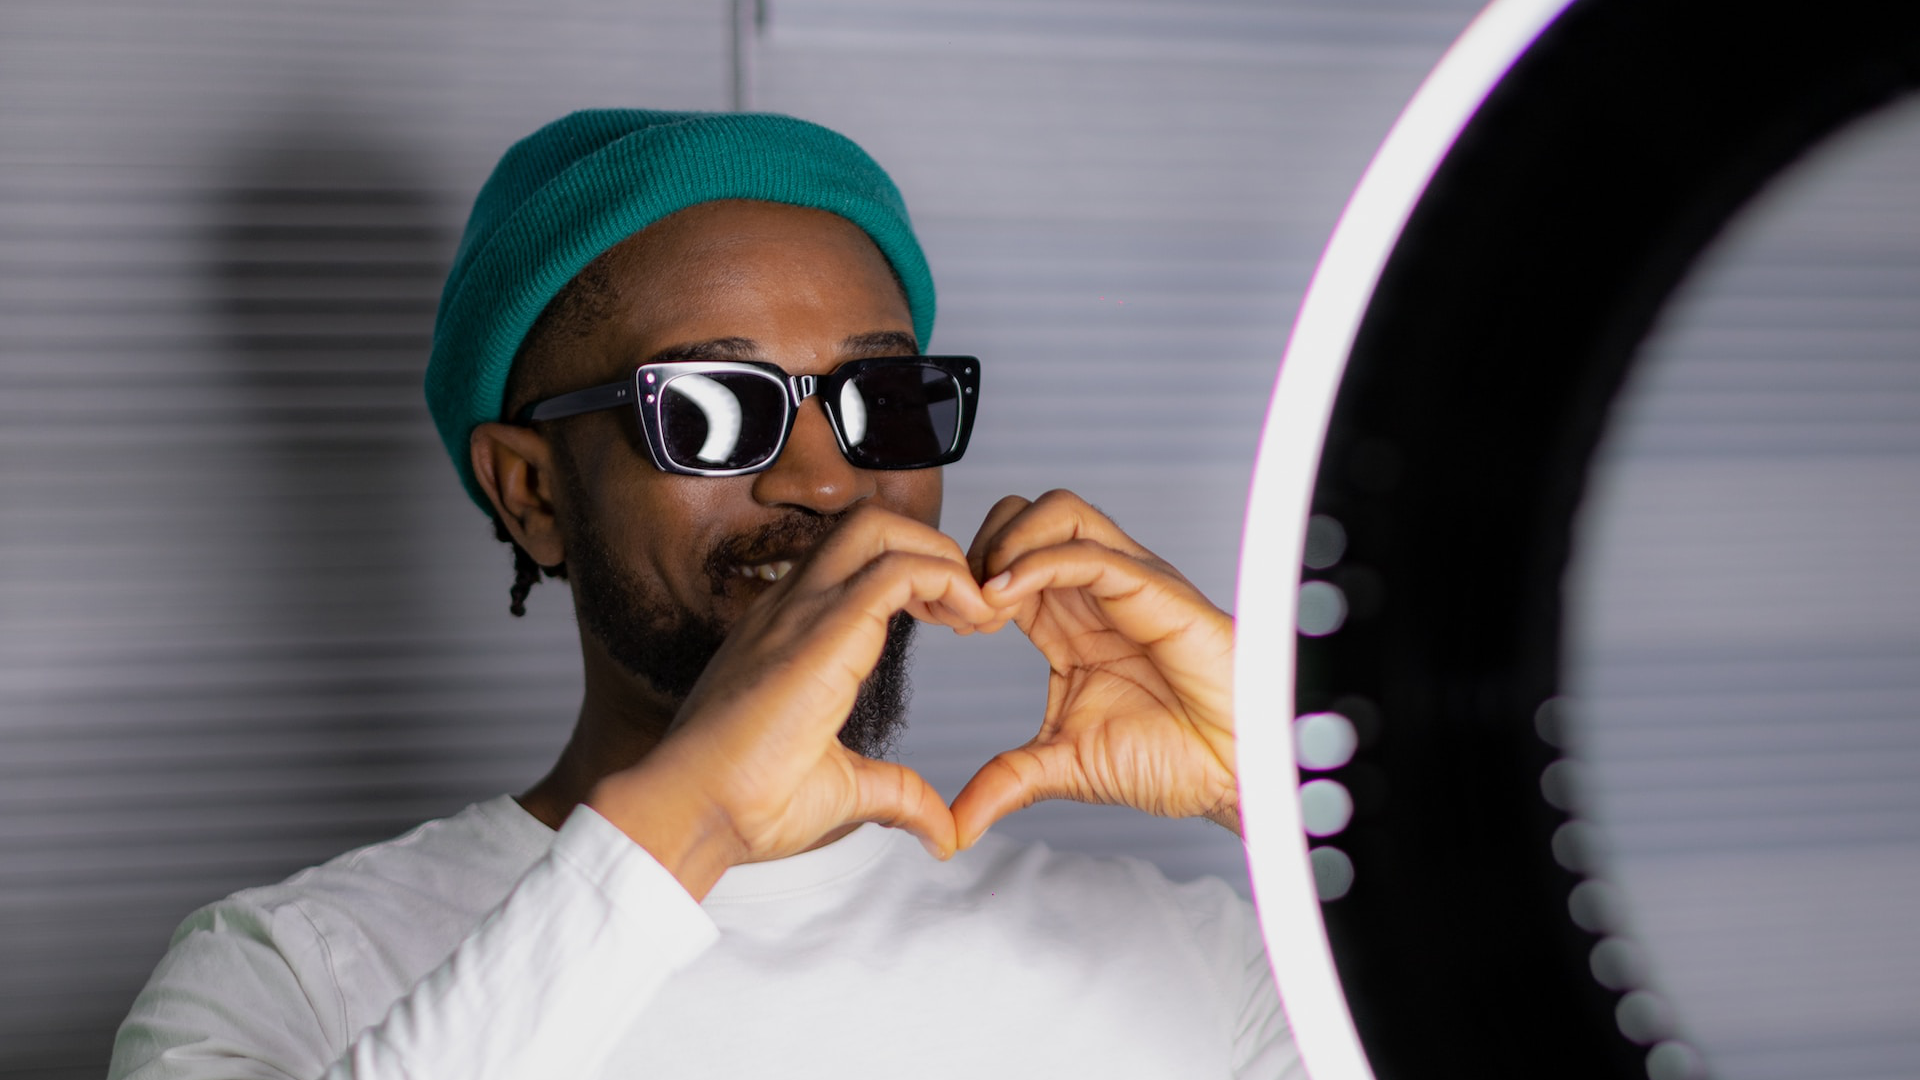 Photo of an influencer making a heart symbol with his hands standing behind a ring light